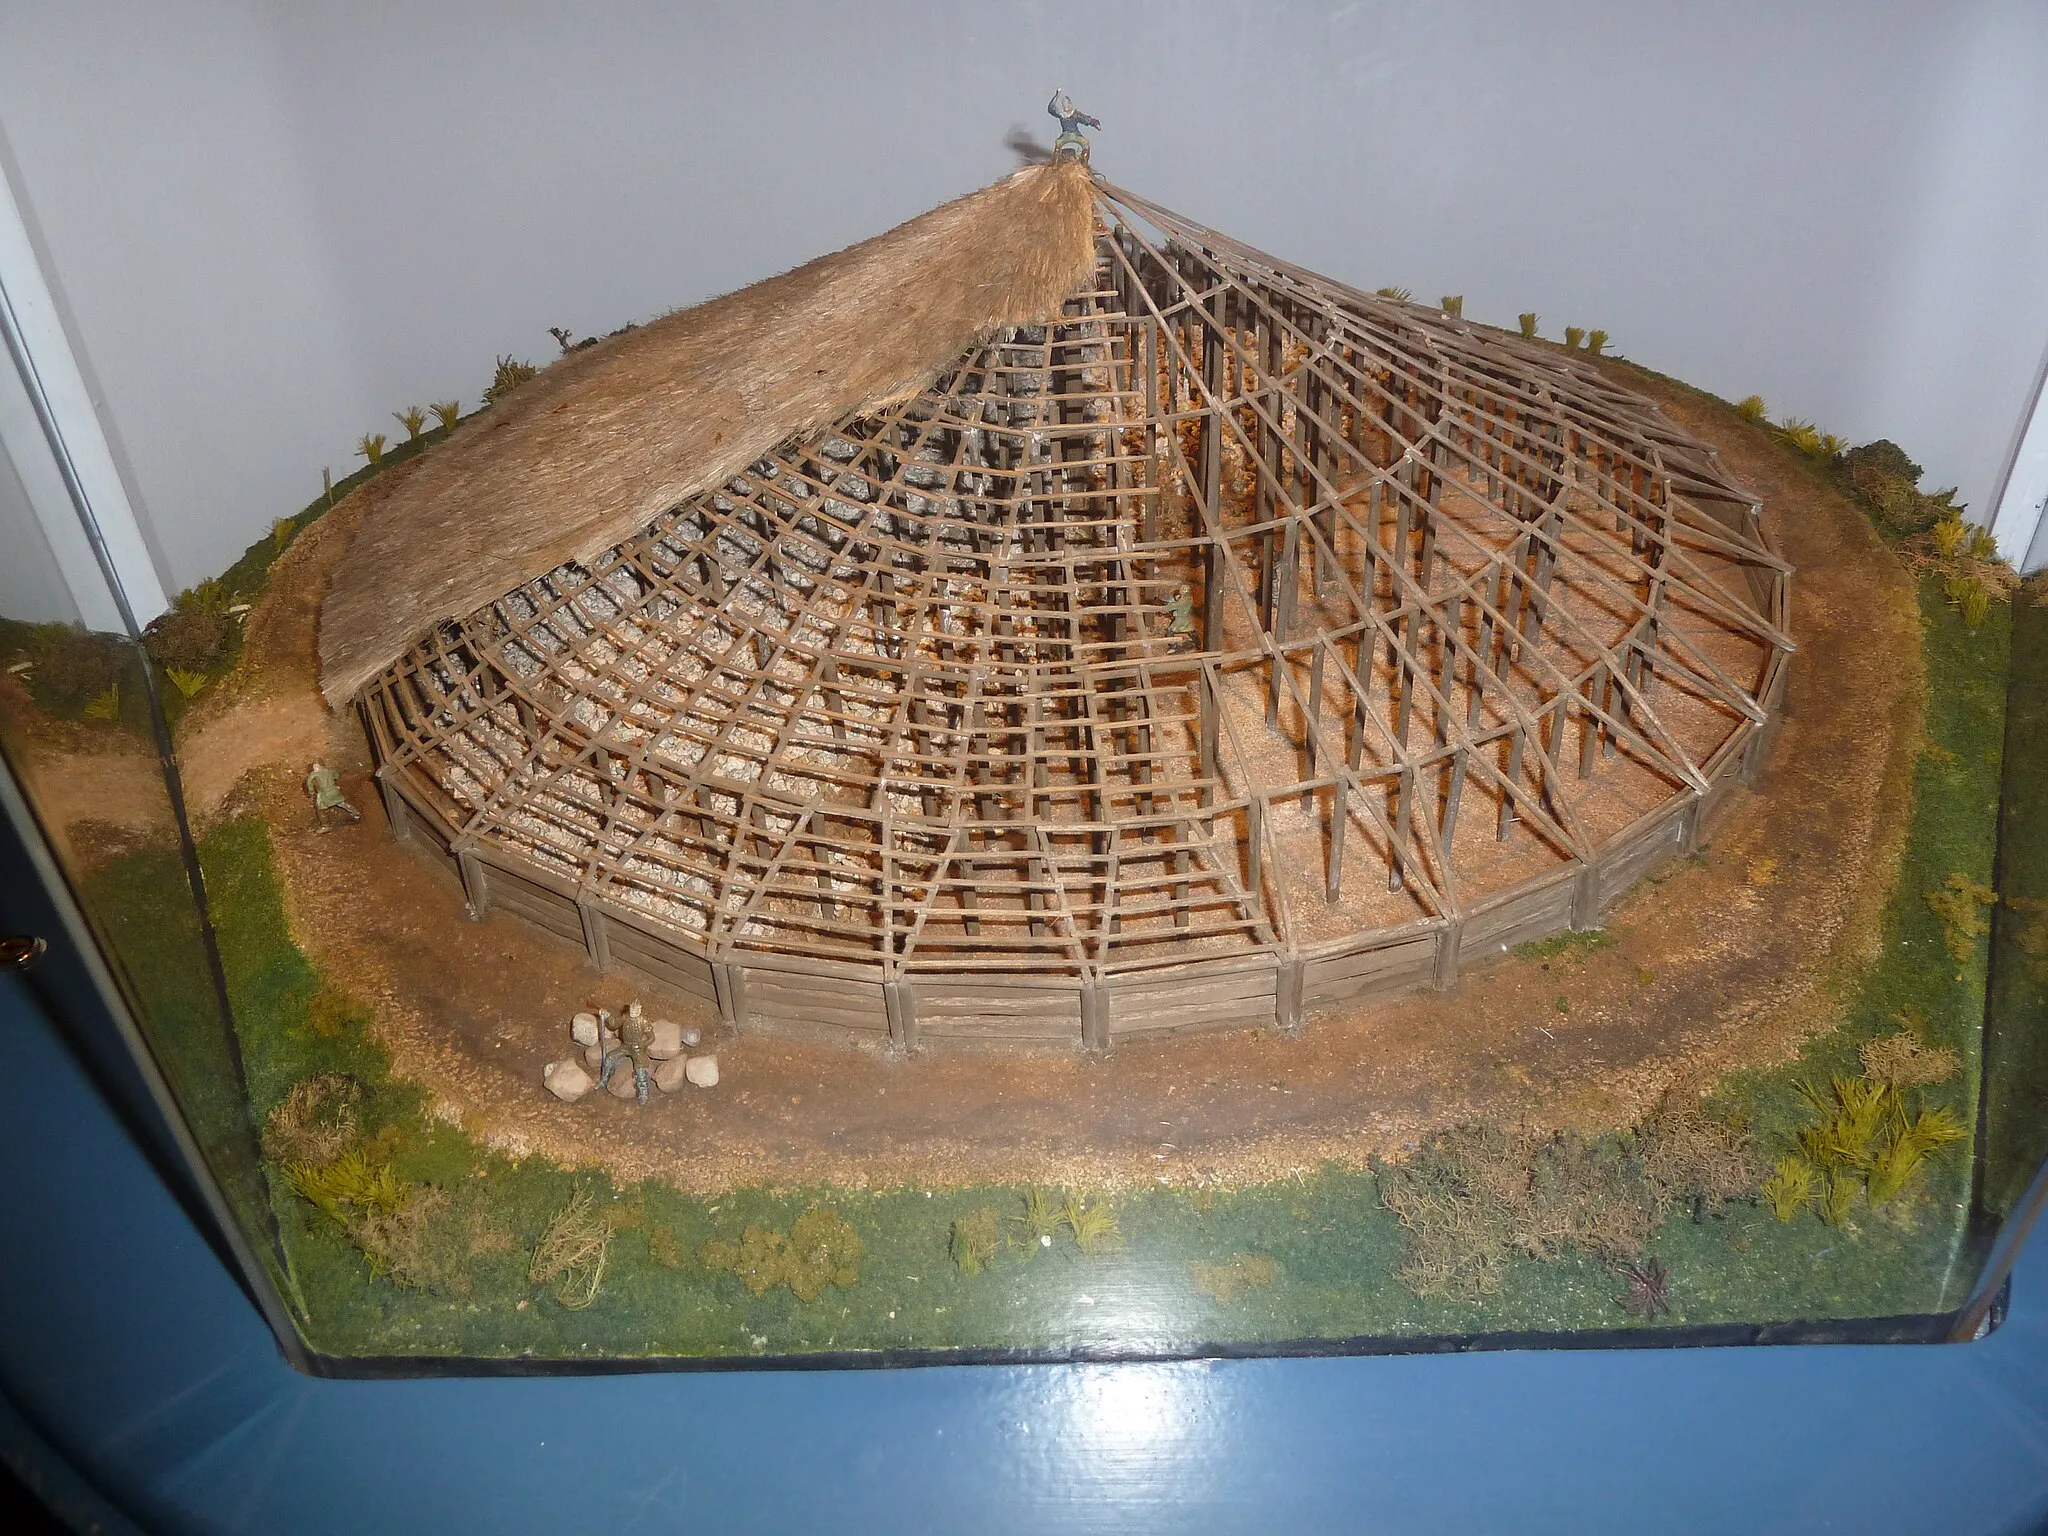 Photo showing: Reconstruction of the Iron age building at Navan, Co. Armagh, Ireland.
Archaeological excavations have revealed that the construction of the 40 metre mound dates to 95 BC (securely dated by dendrochronology).[3] A roundhouse-like structure consisting of four concentric rings of posts around a central oak trunk was built, its entrance facing west (prehistoric houses invariably face east, towards the sunrise). The floor of the building was covered with stones arranged in radial segments, and the whole edifice was deliberately burnt down before being covered in a mound of earth and turf (there is archaeological evidence for similar repeated building and burning of Tara and Dún Ailinne).[3] The bank and ditch that mark the enclosure were made at the same time.